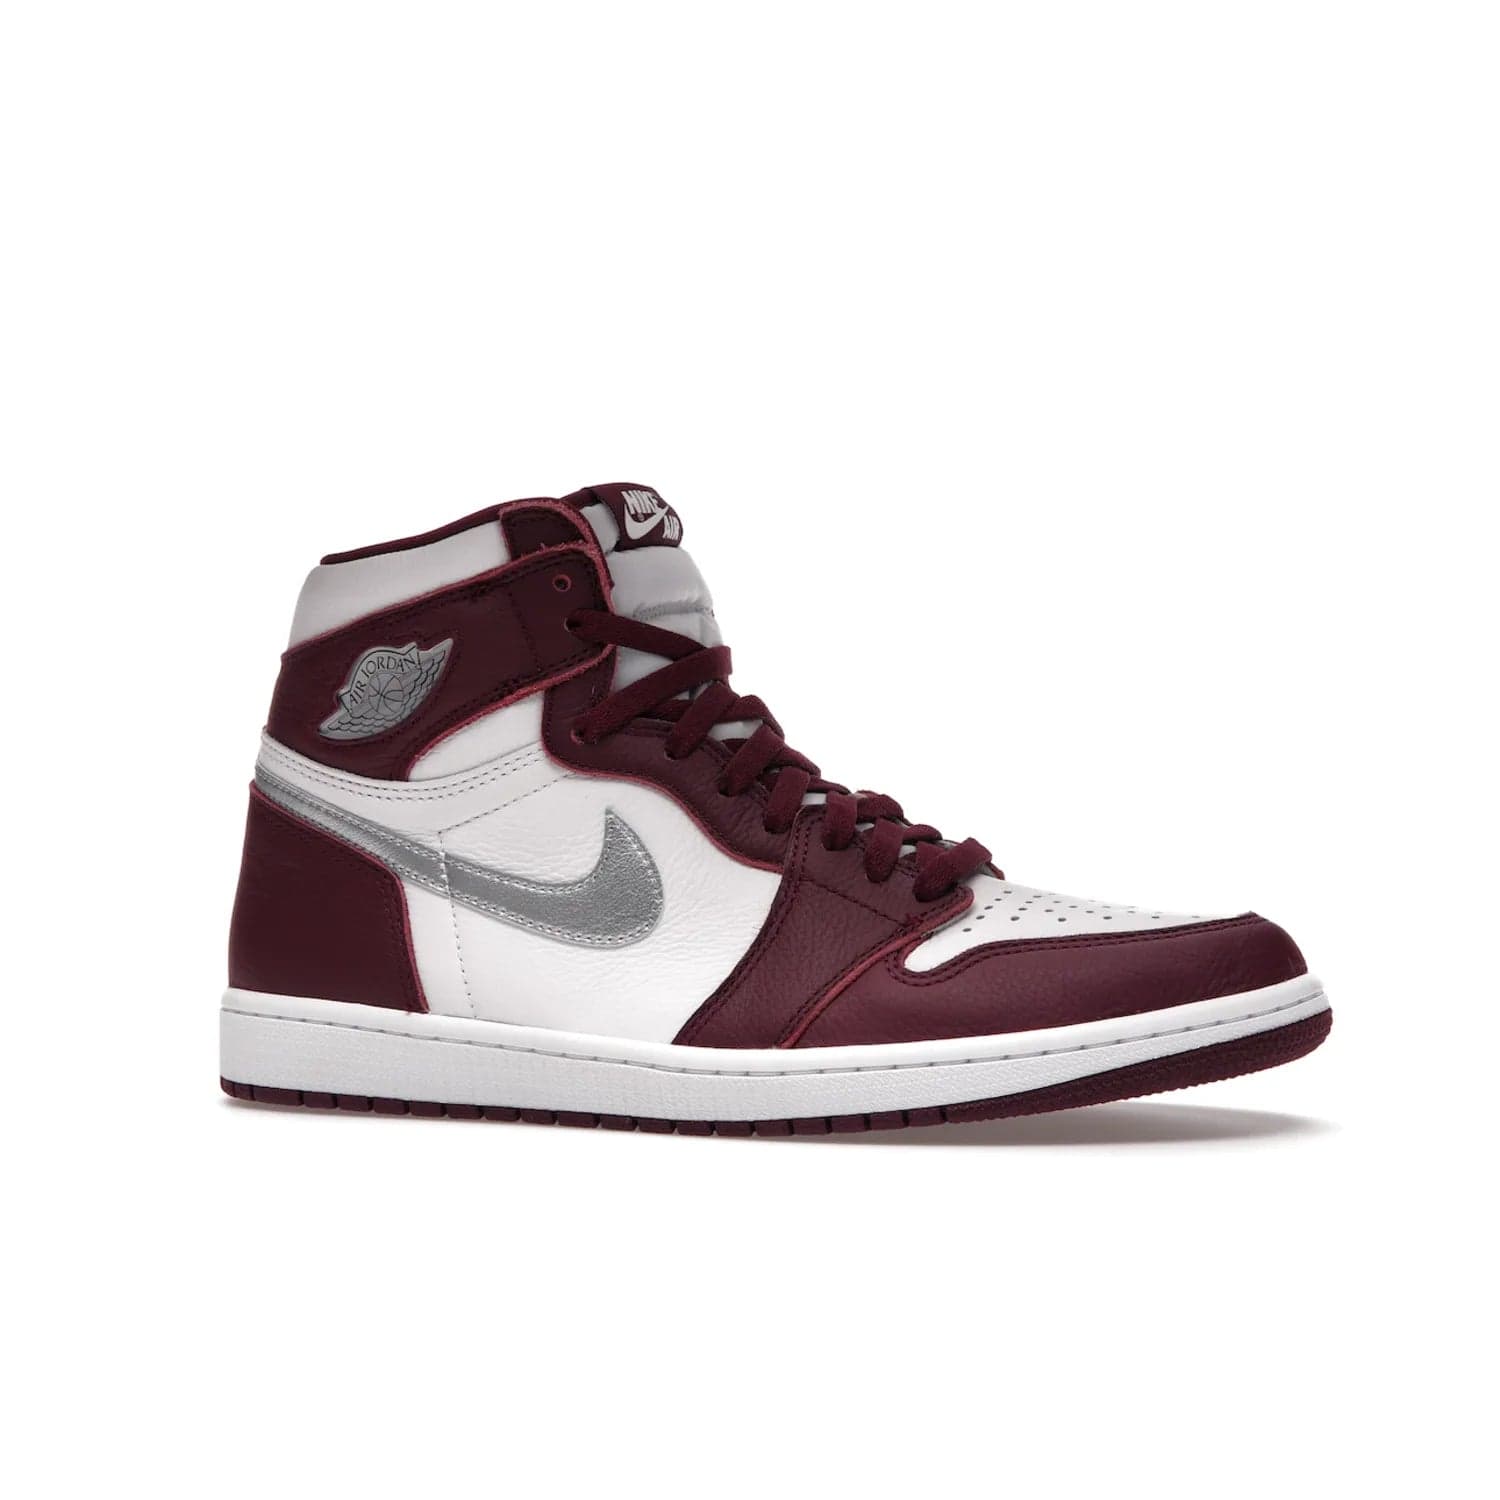 Jordan 1 Retro High OG Bordeaux - Image 3 - Only at www.BallersClubKickz.com - Shop the classic Air Jordan 1 High Bordeaux with a modern high-top cut. The timeless Bordeaux and White-Metallic Silver colorway, releasing Nov 20, 2021, is perfect for practice or a night out.